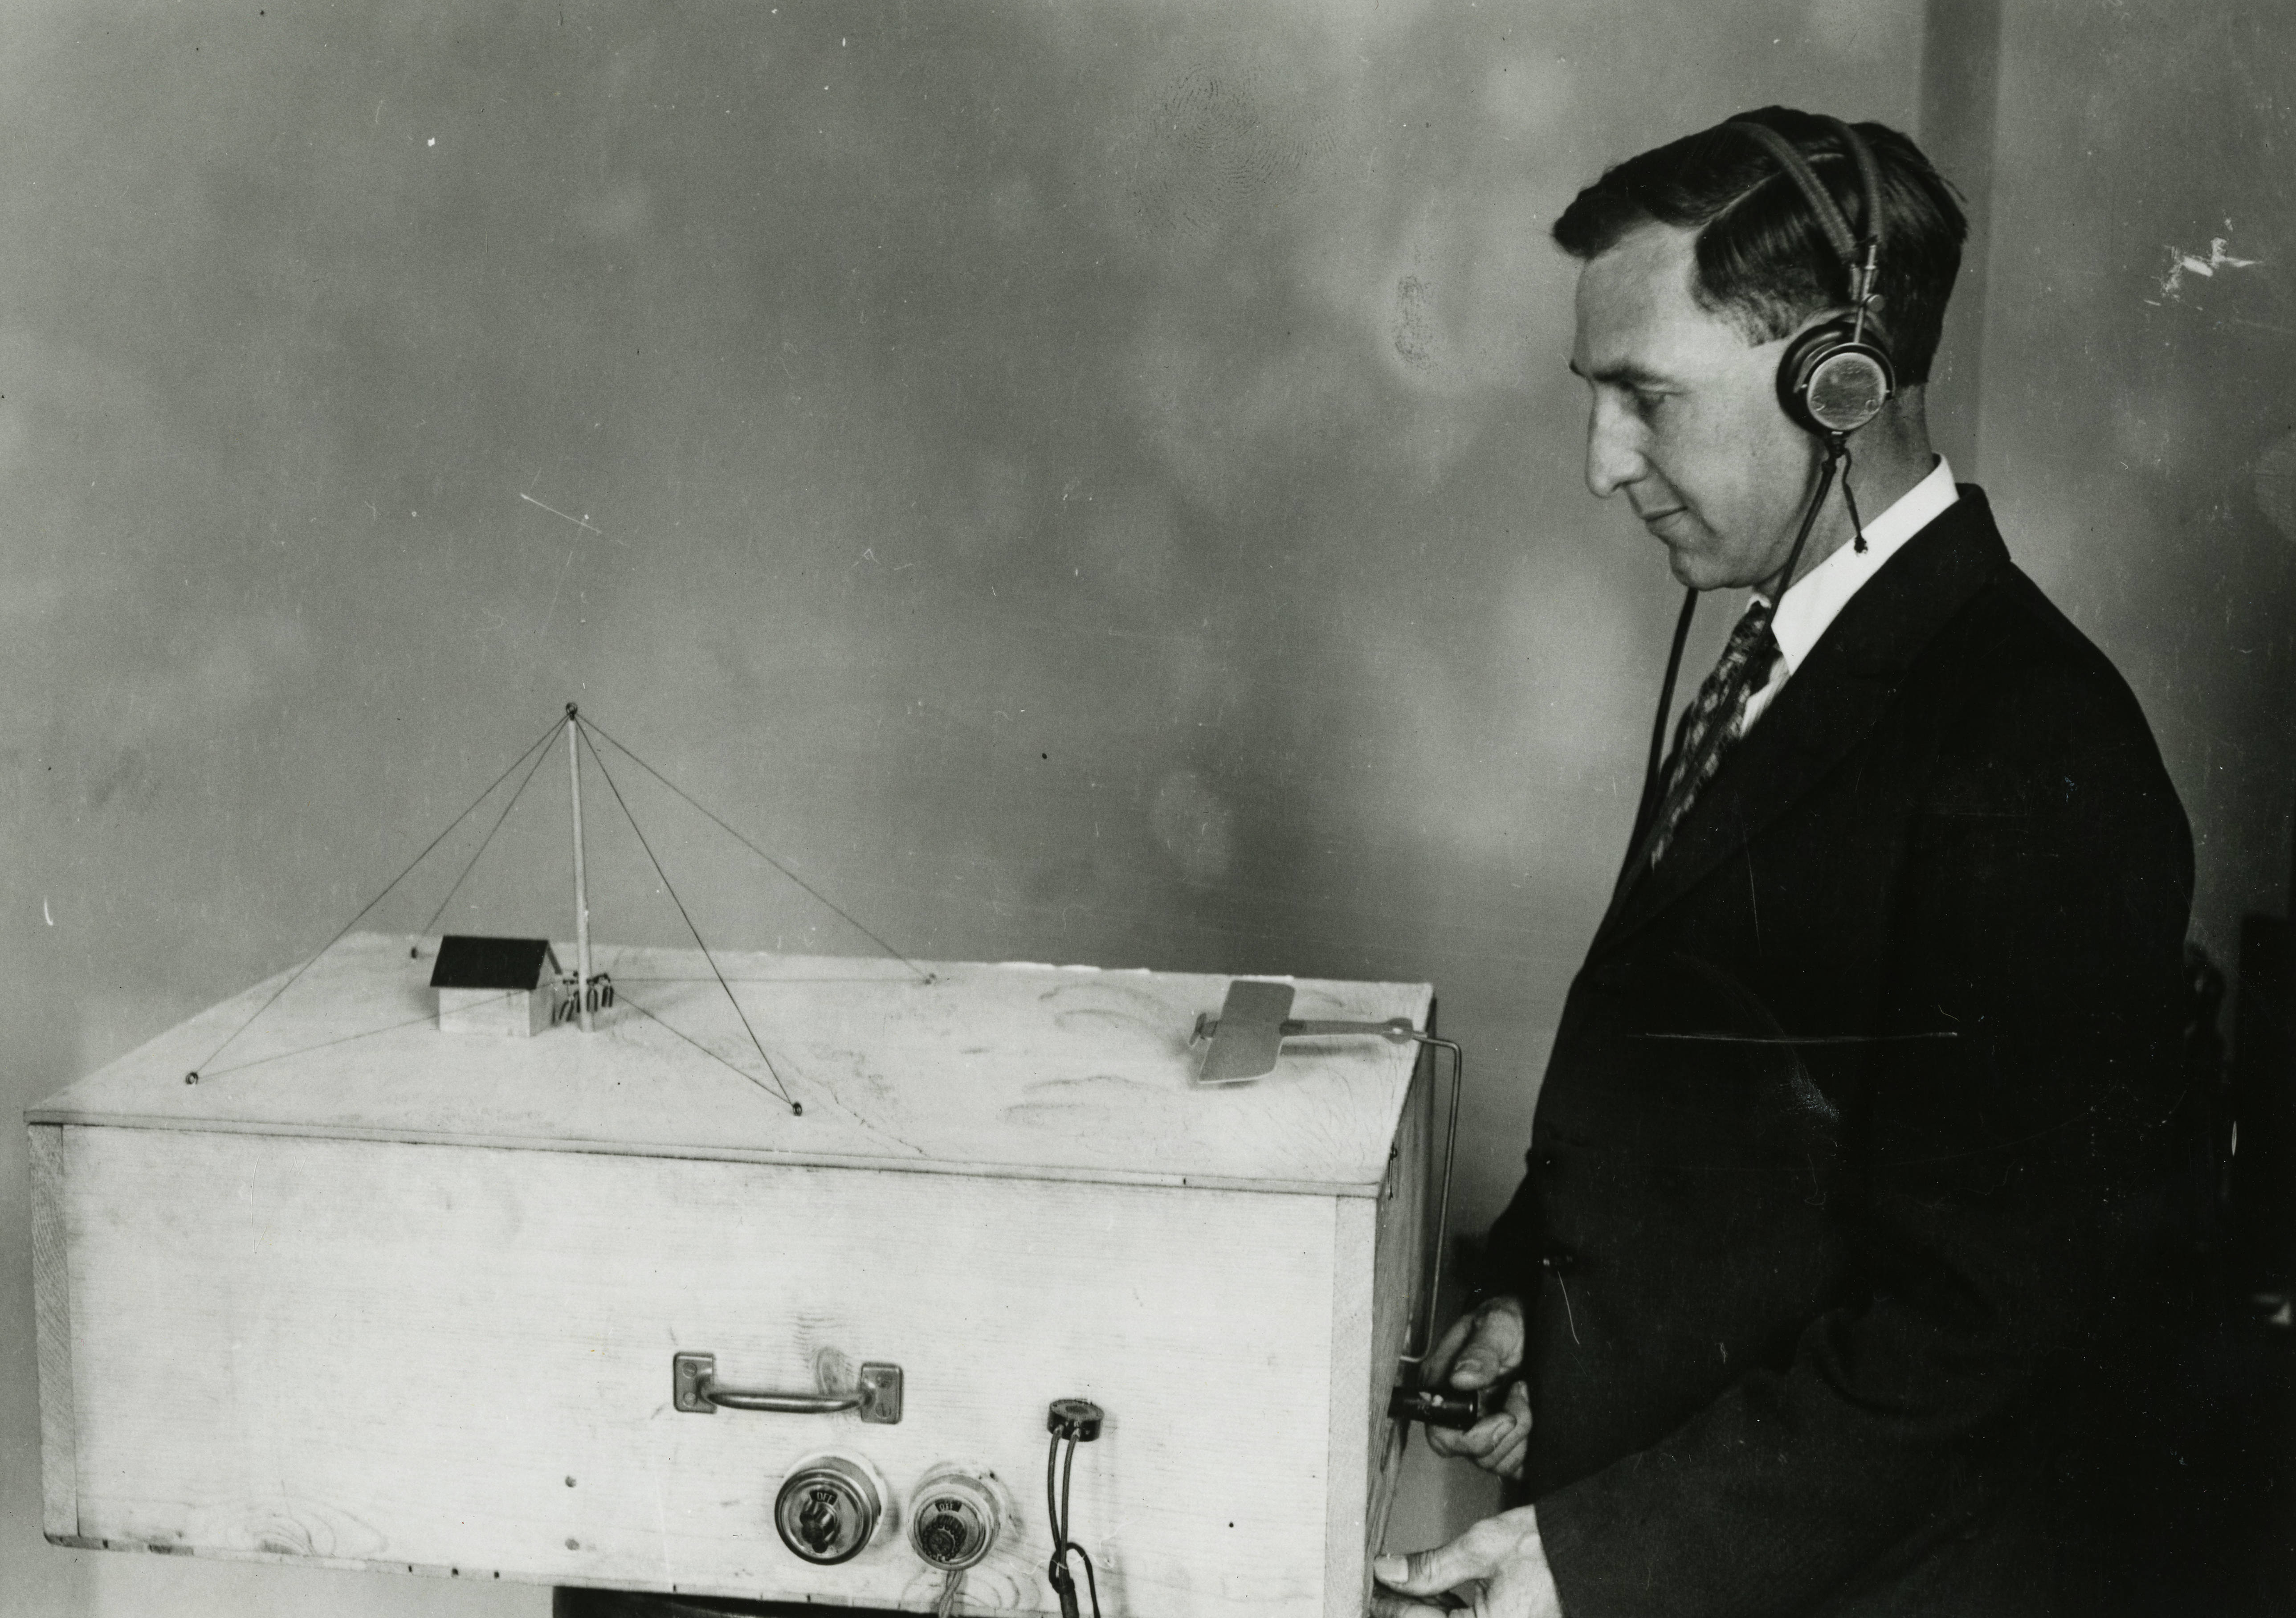 physicist Francis Dunmore operates a model illustrating the radio beacon system used in guiding aircraft